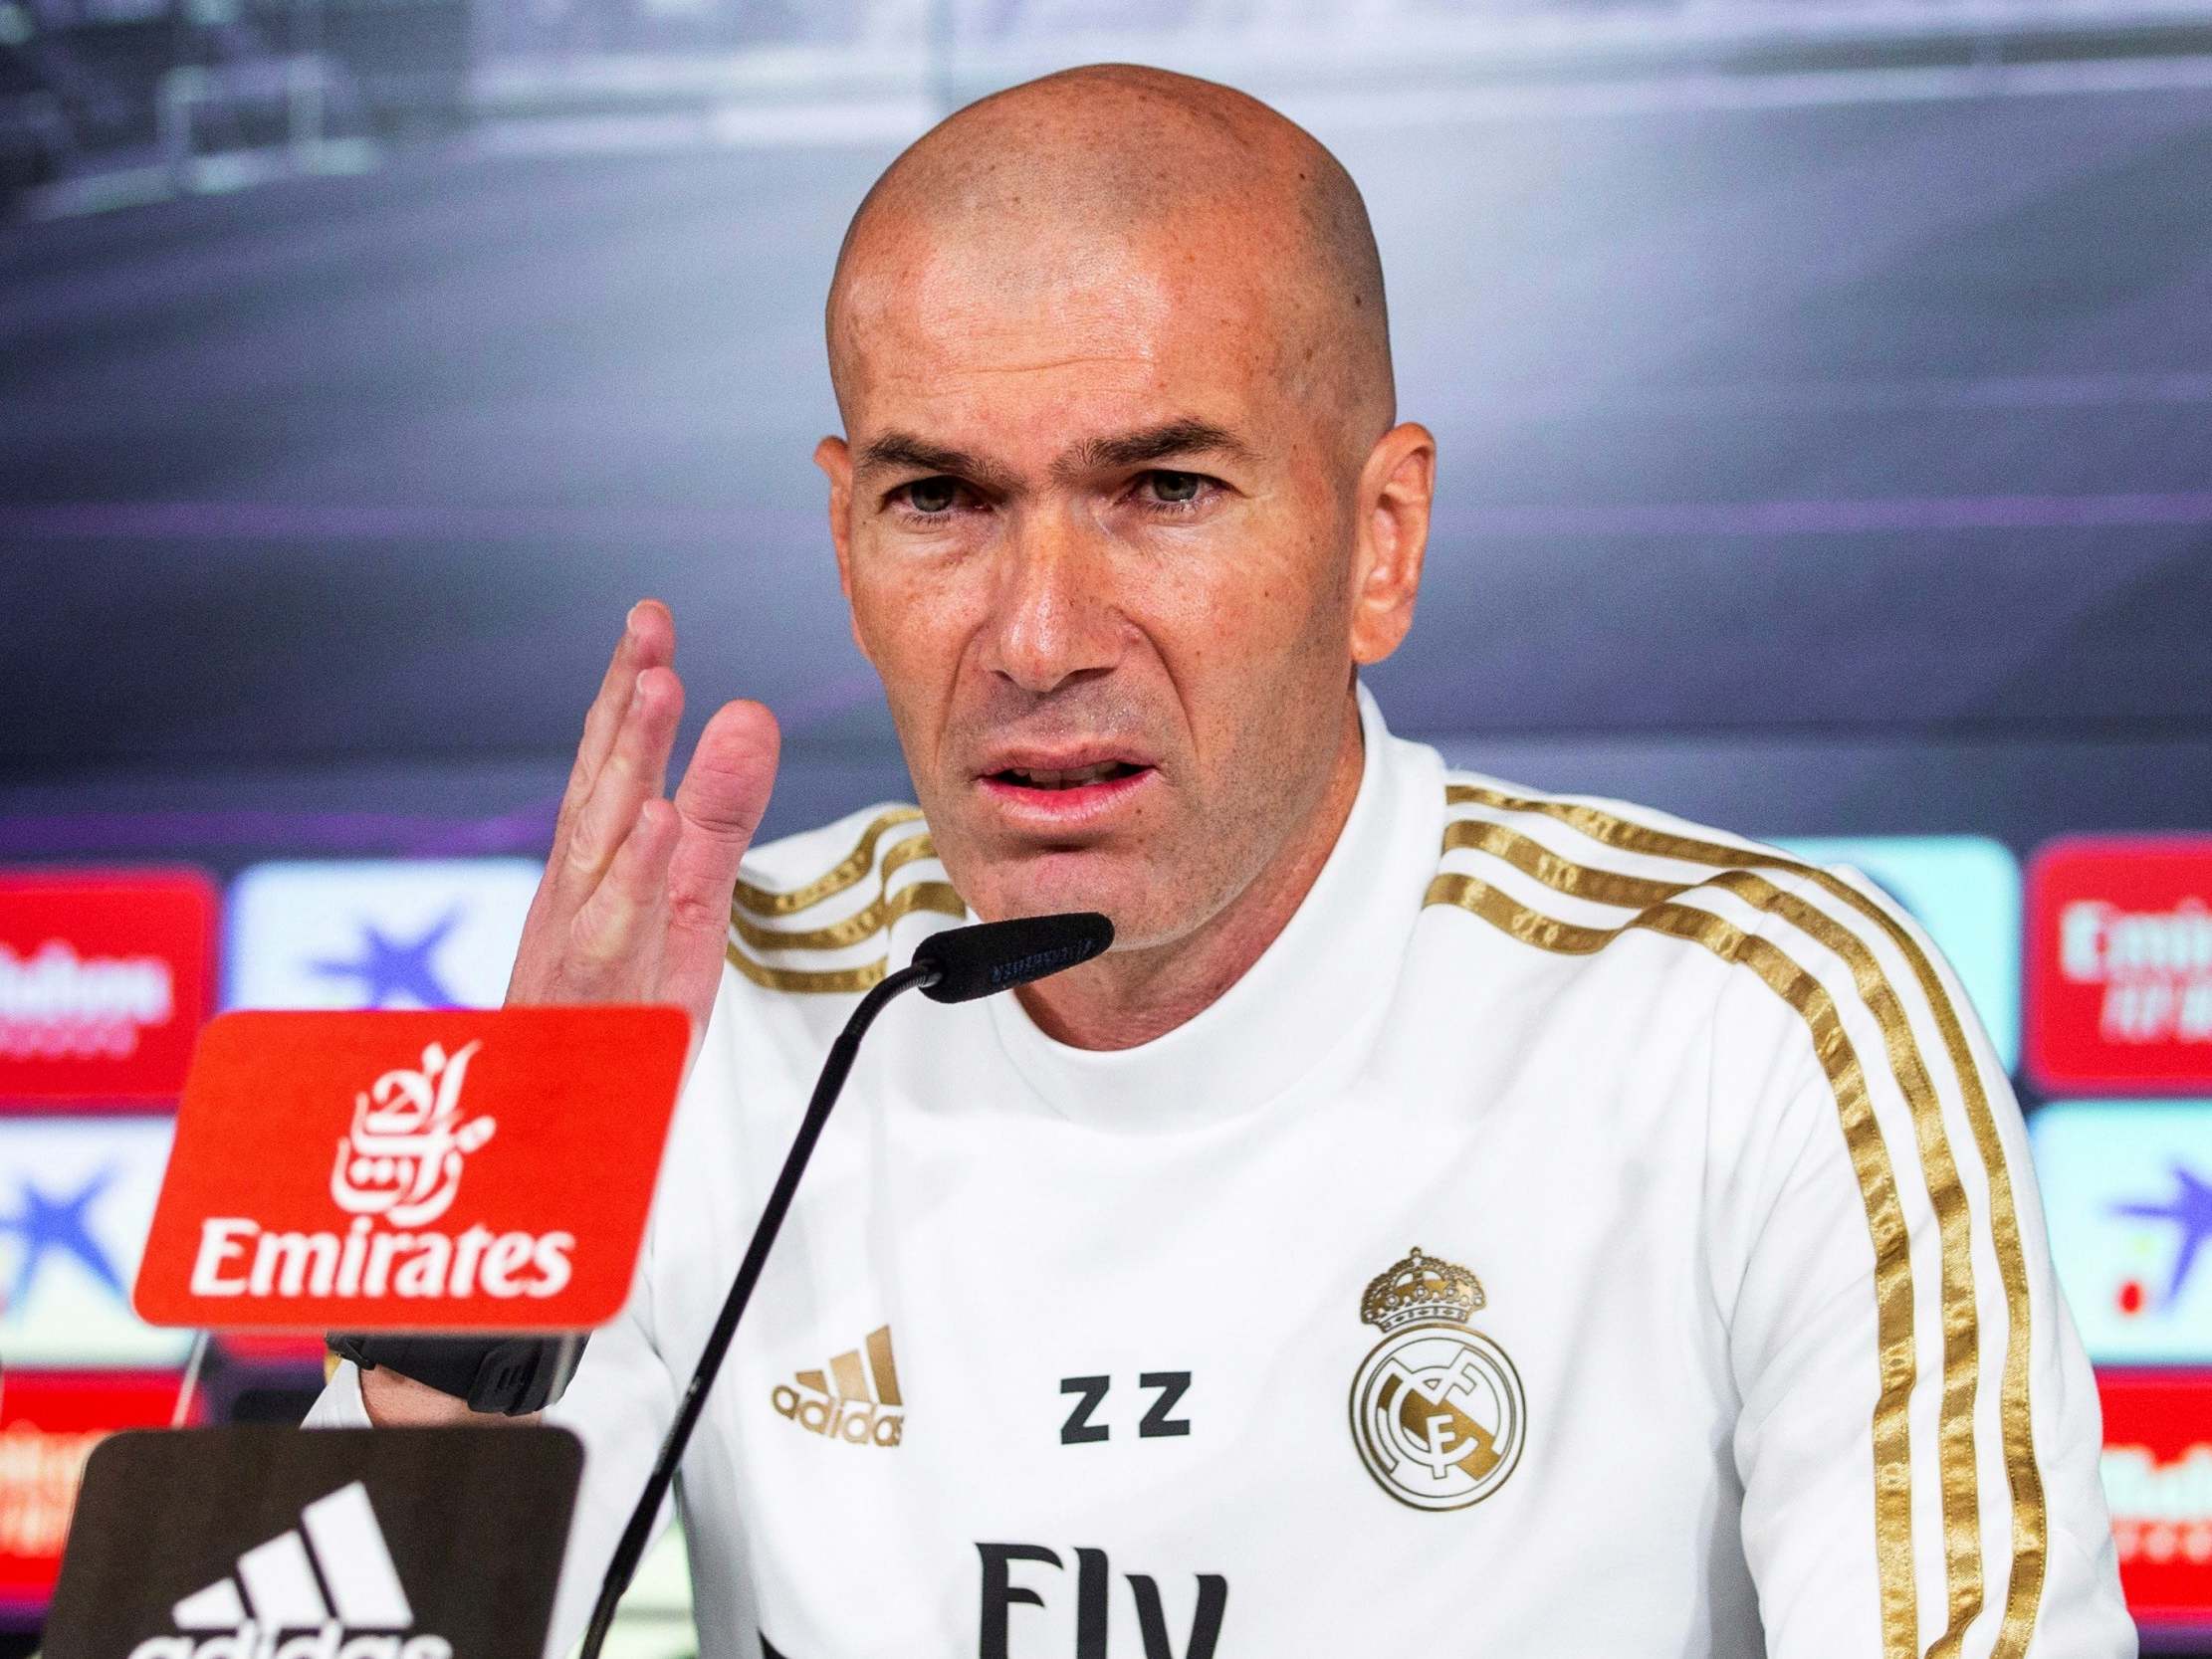 There have been questions over the decision to reappoint Zinedine Zidane